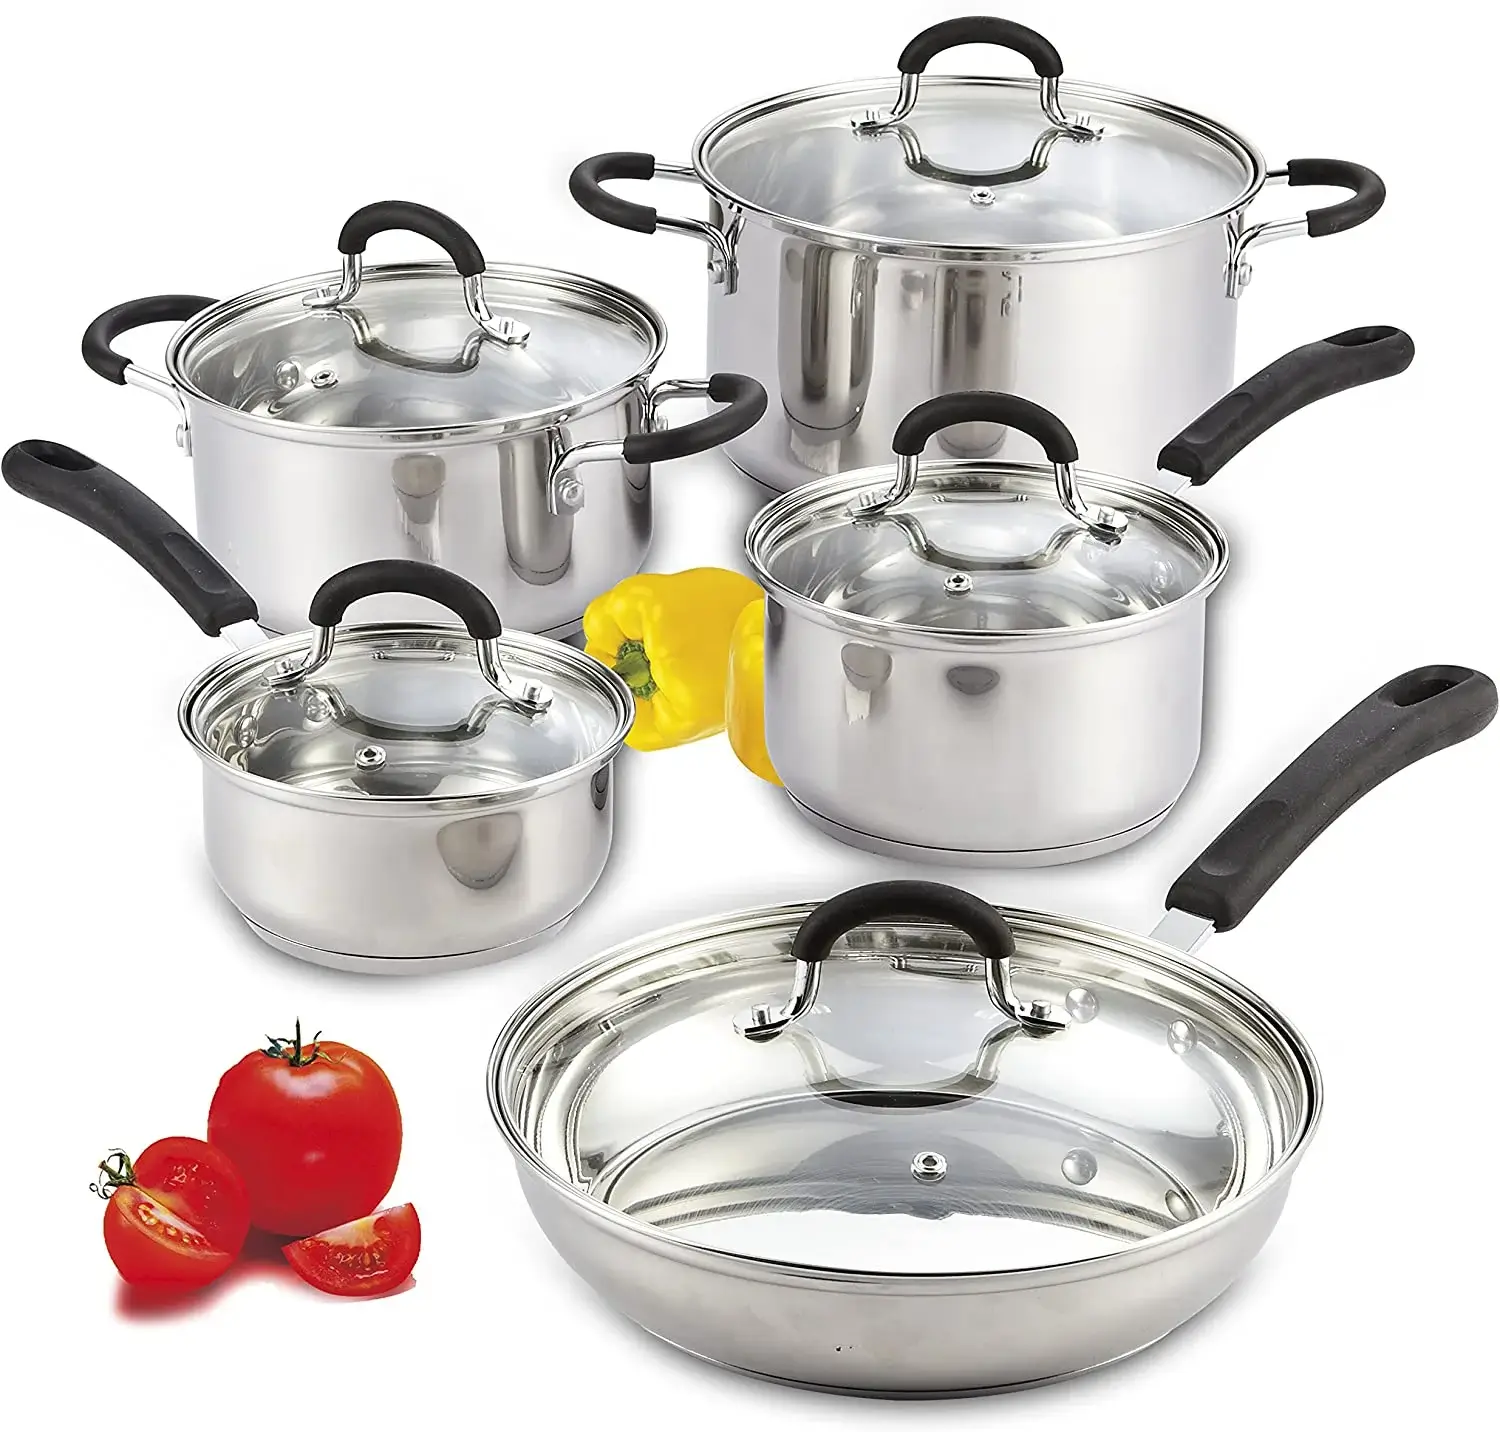 Cook N Home 10-Piece Stainless Steel Cookware Set - Best Value